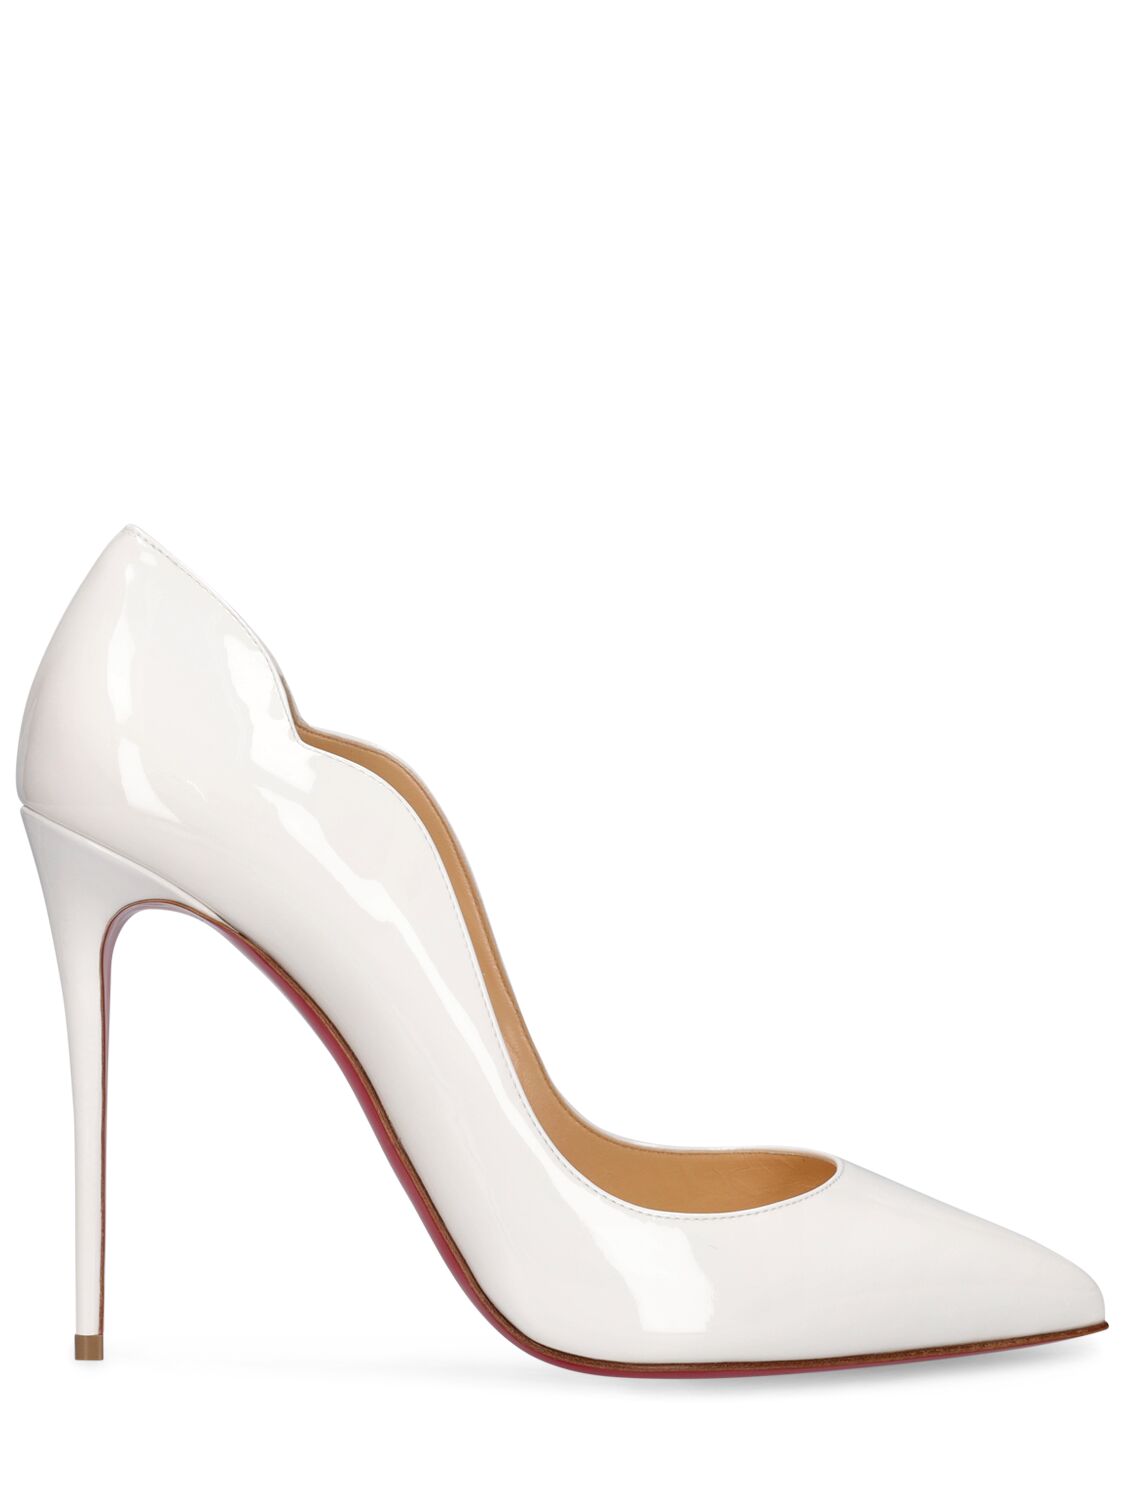 Shop Christian Louboutin 100mm Hot Chick Patent Leather Pumps In White